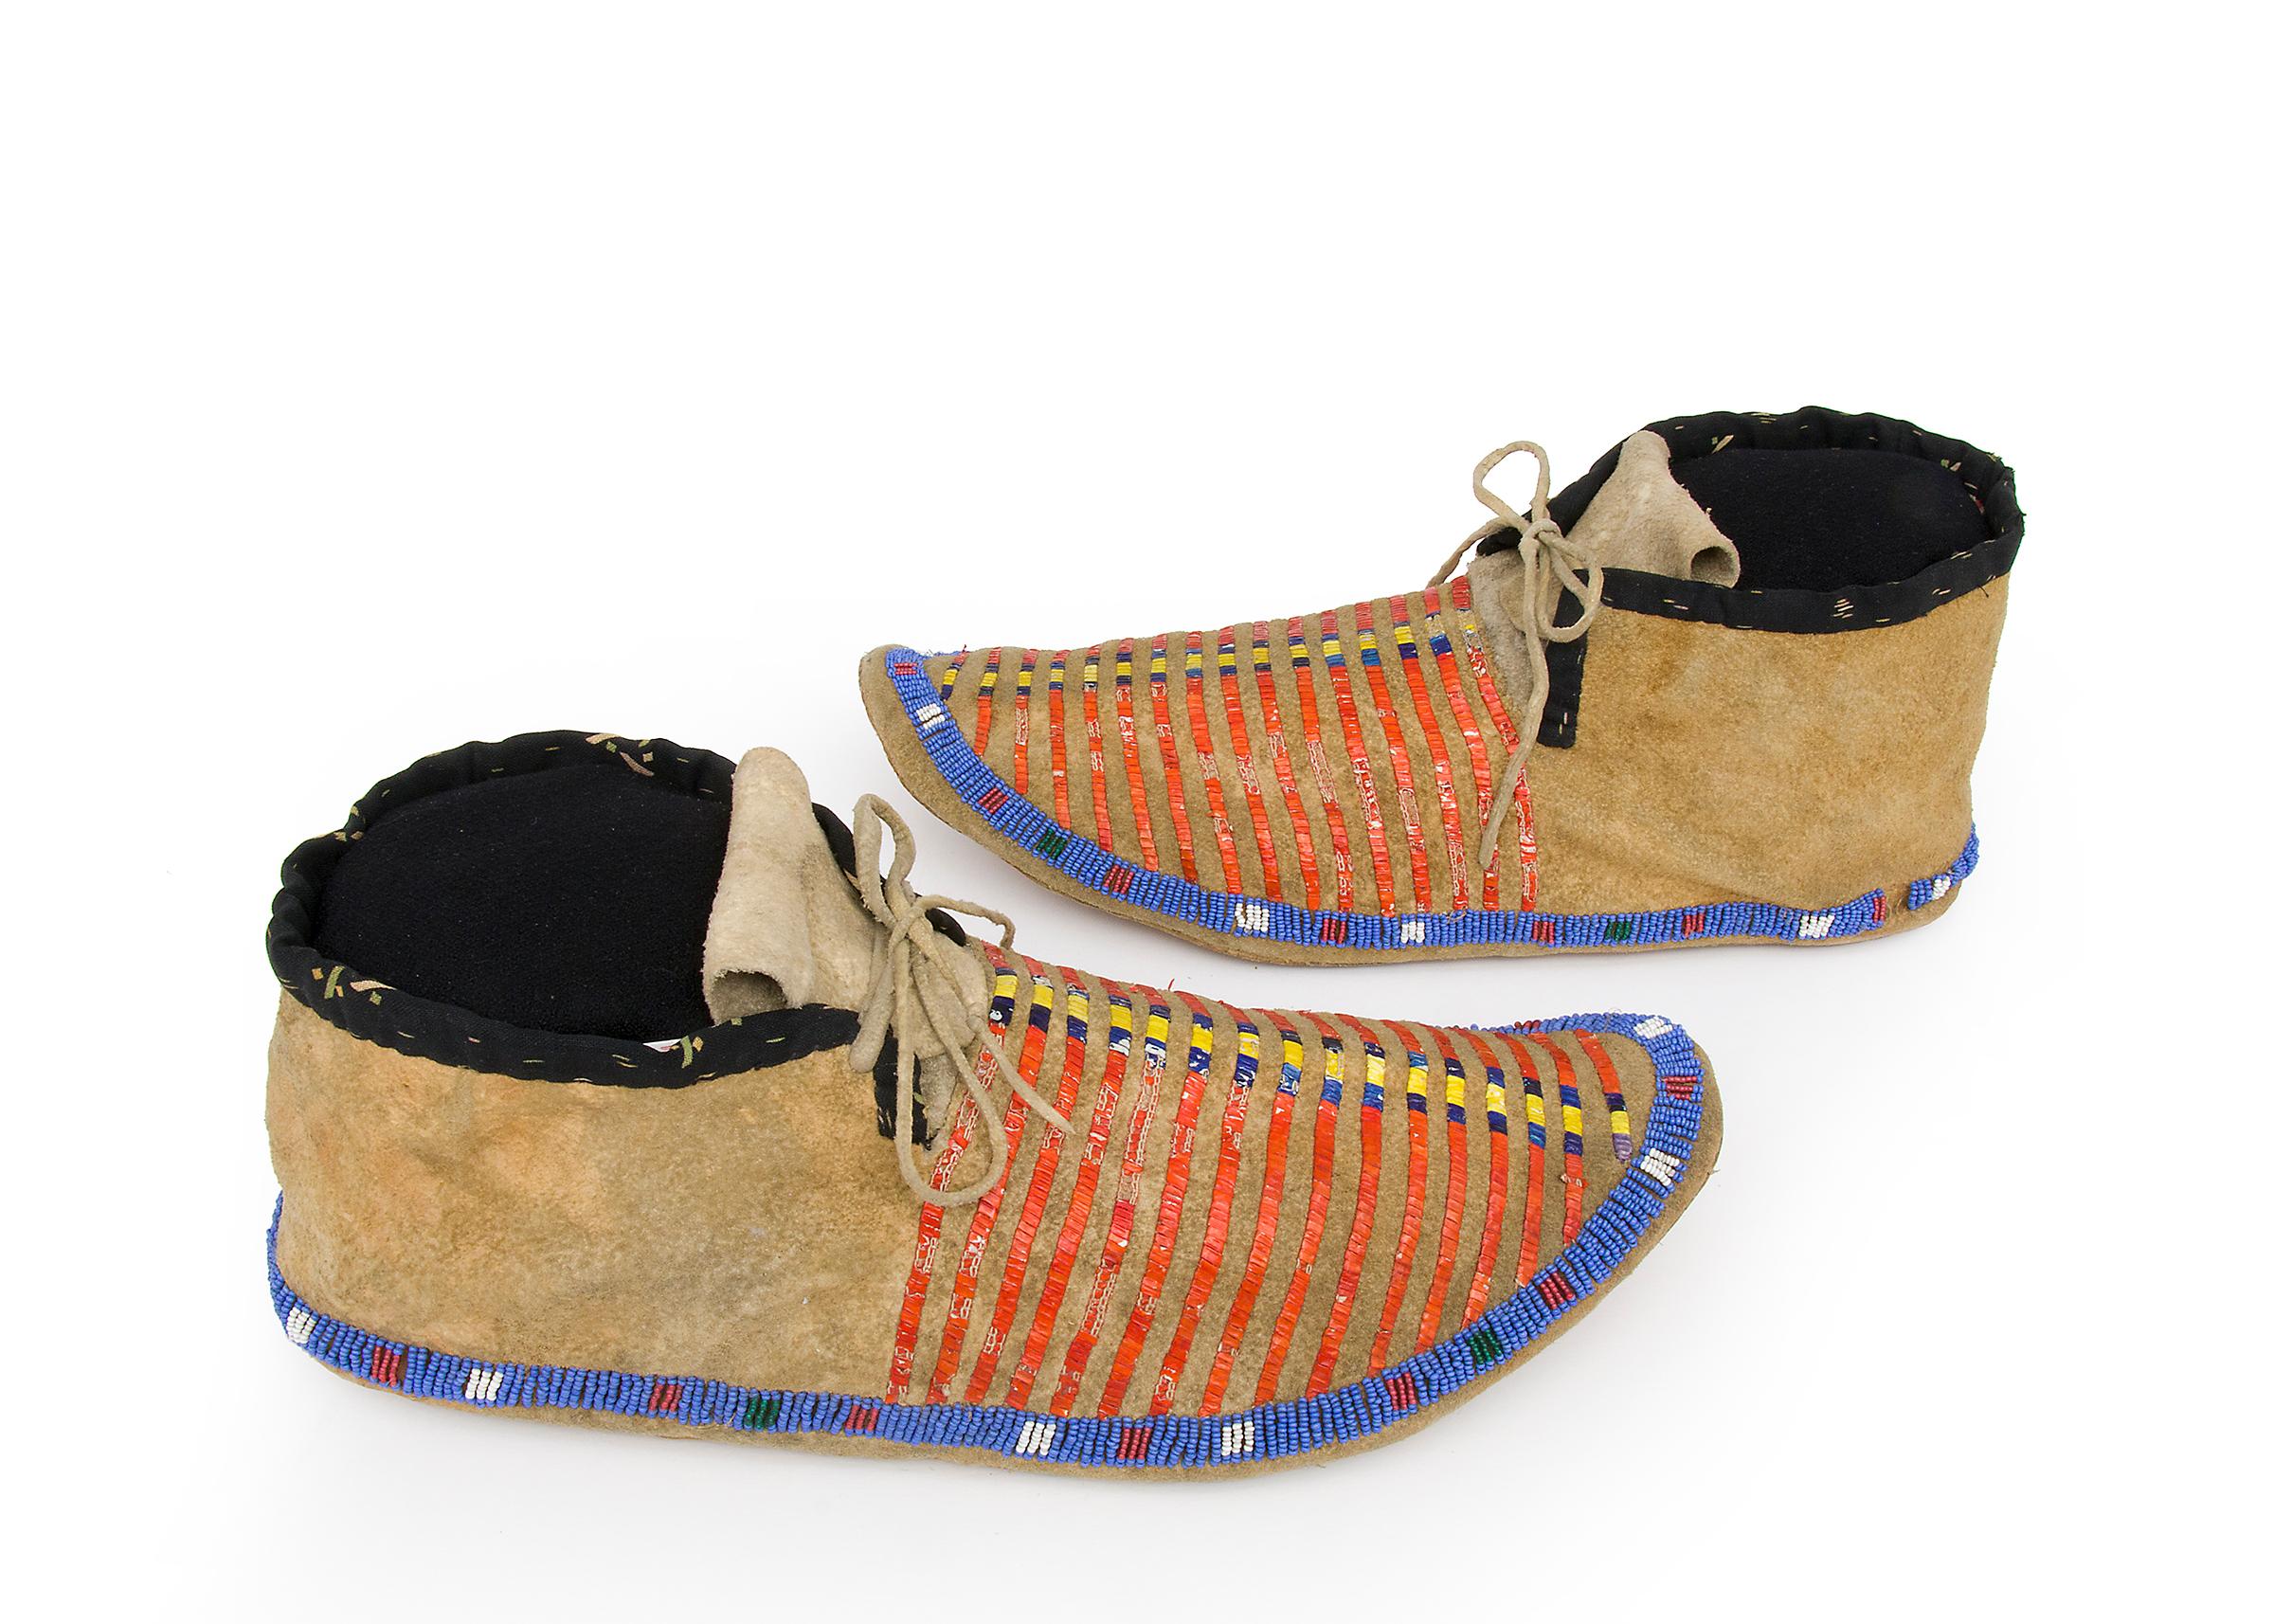 Pair of antique Native American moccasins dating to the late Classic Period (1650-1875). Hand crafted by a Sioux, Plains Indian, artisan, circa 1870s.  The moccasins are constructed of native tanned buckskin (deer hide) with bands of quill work; the